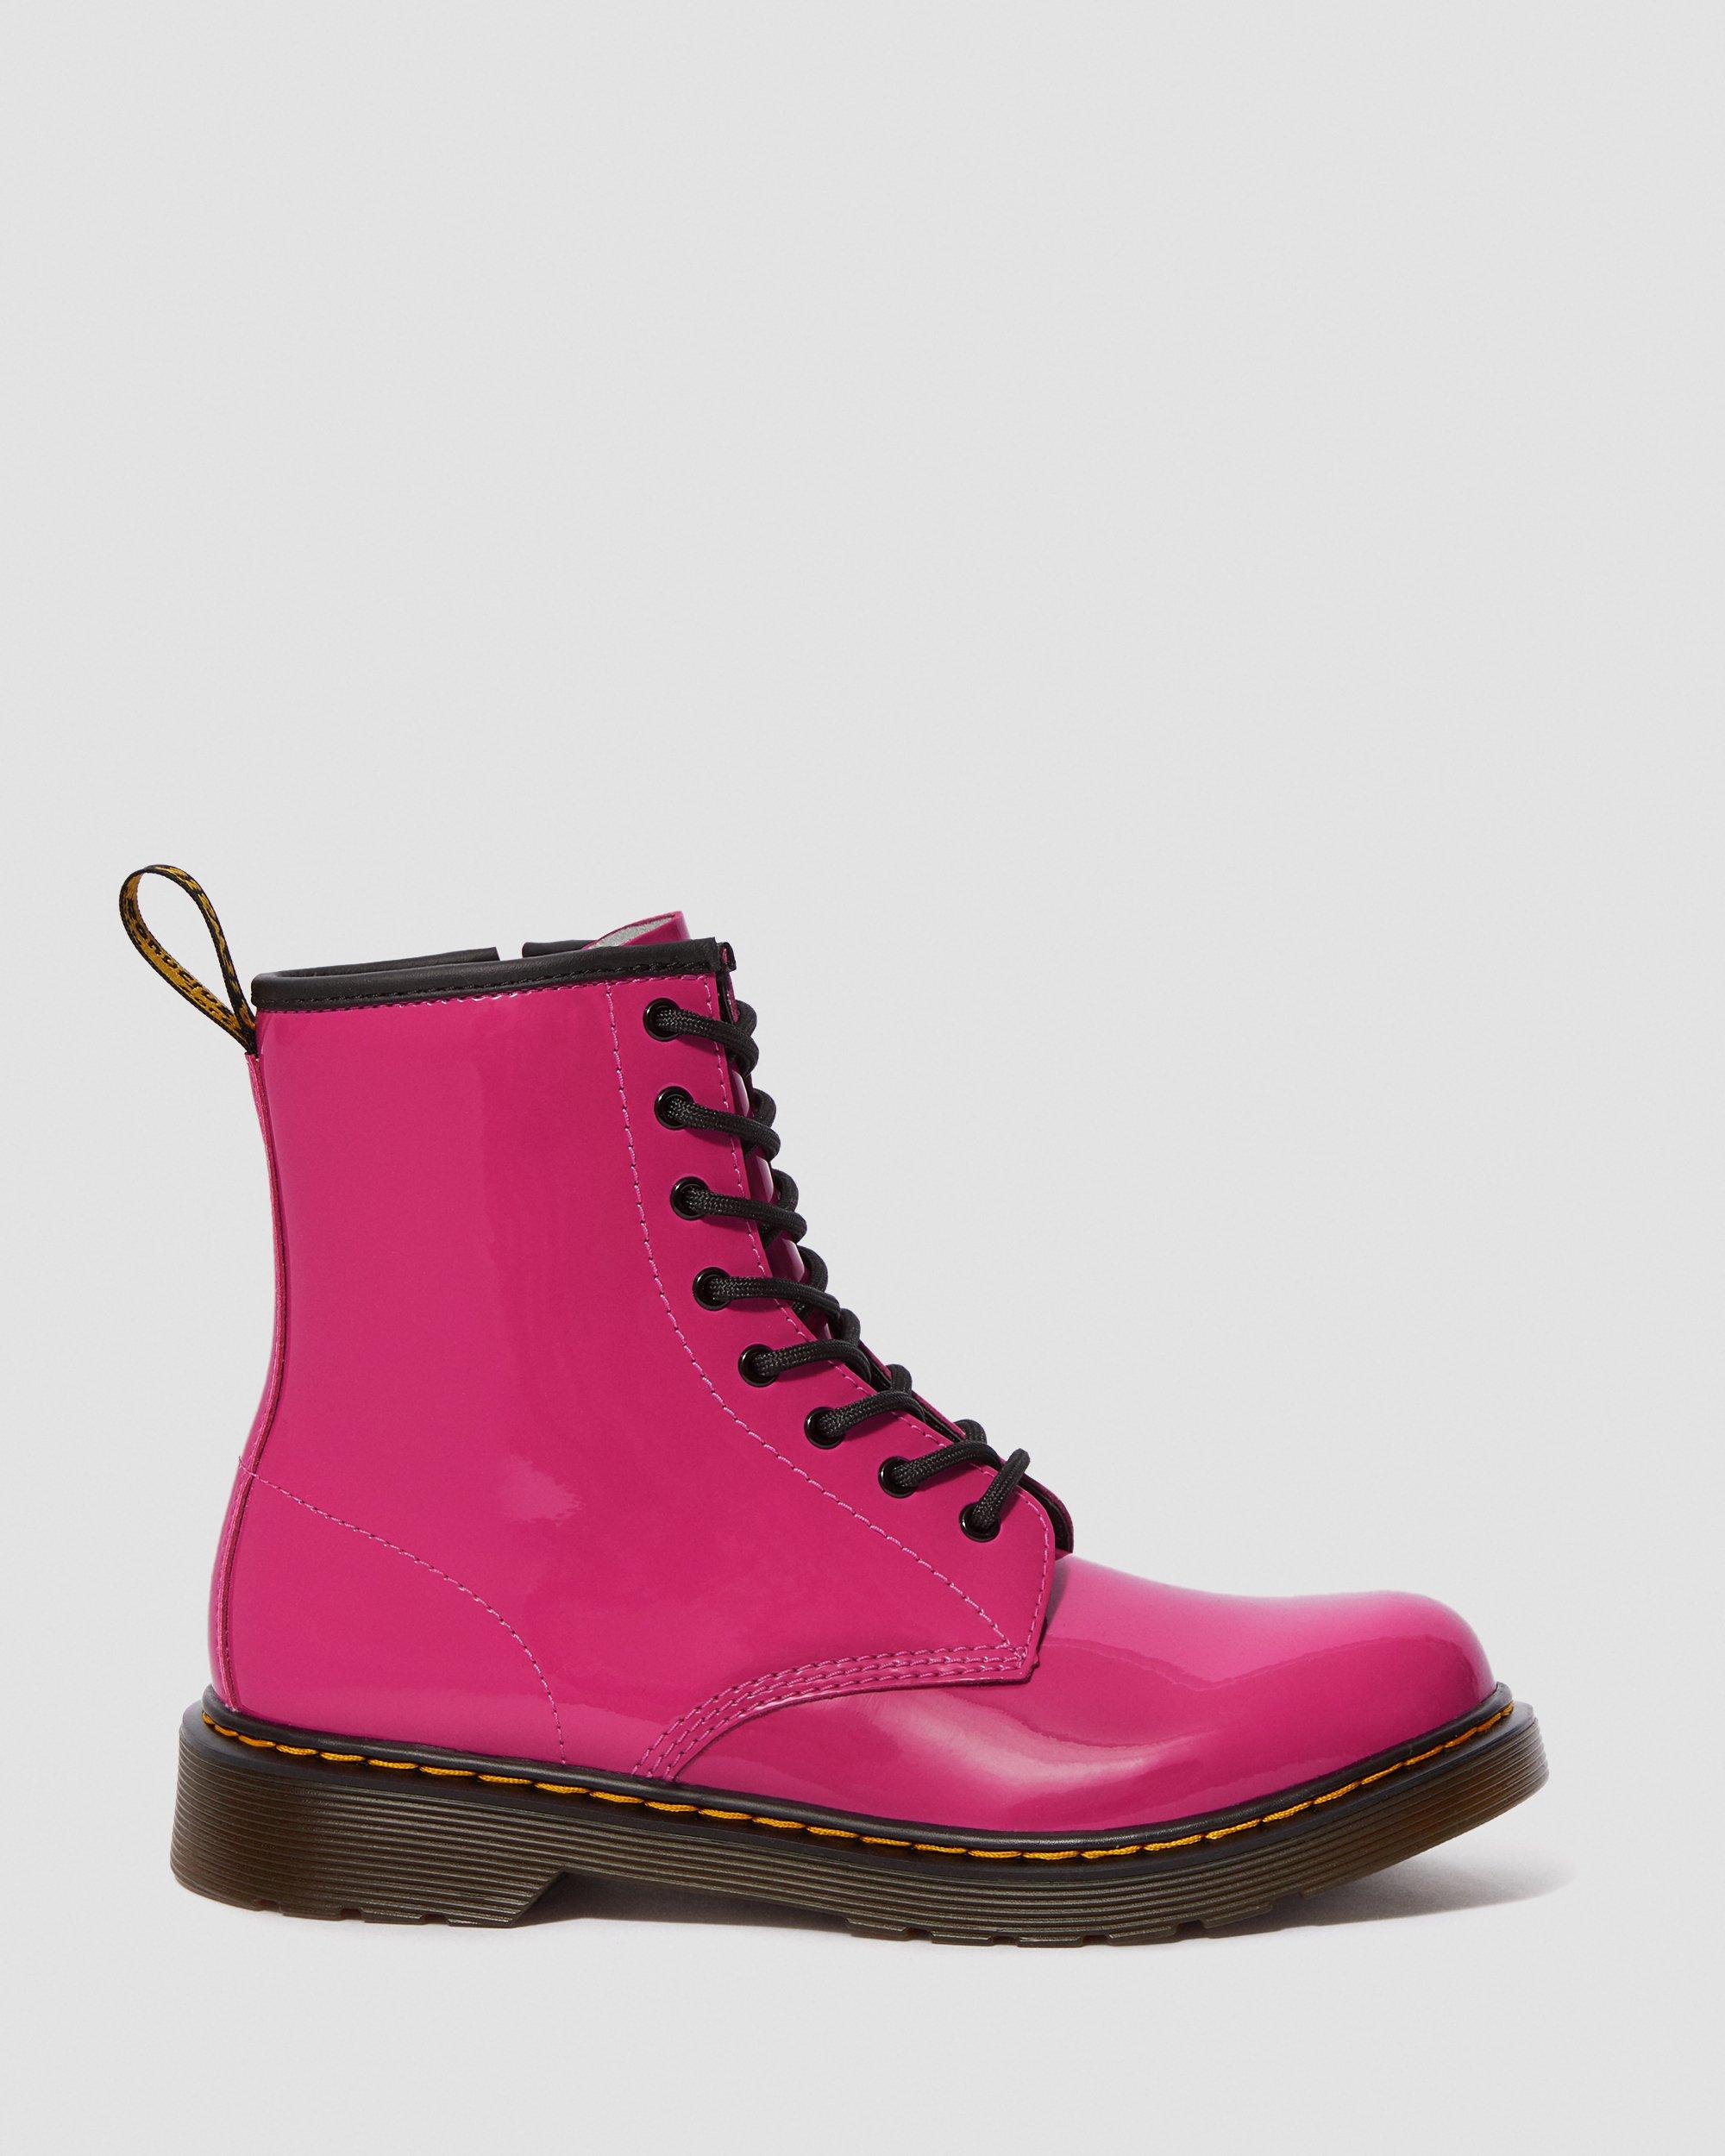 Youth 1460 Patent Leather Lace Up Boots Dr. Martens